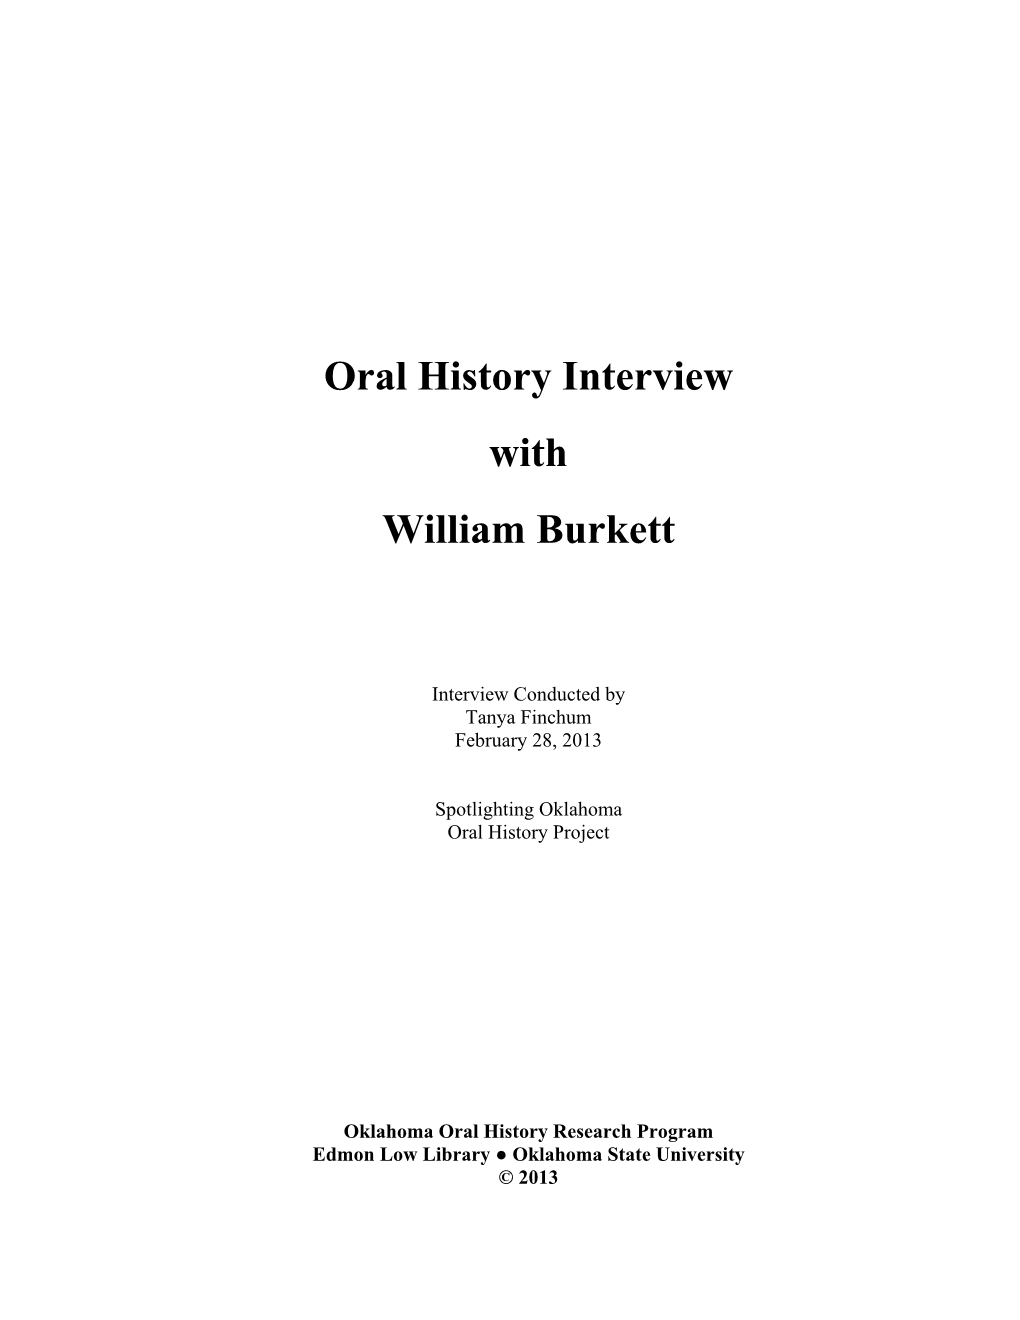 Oral History Interview with William Burkett